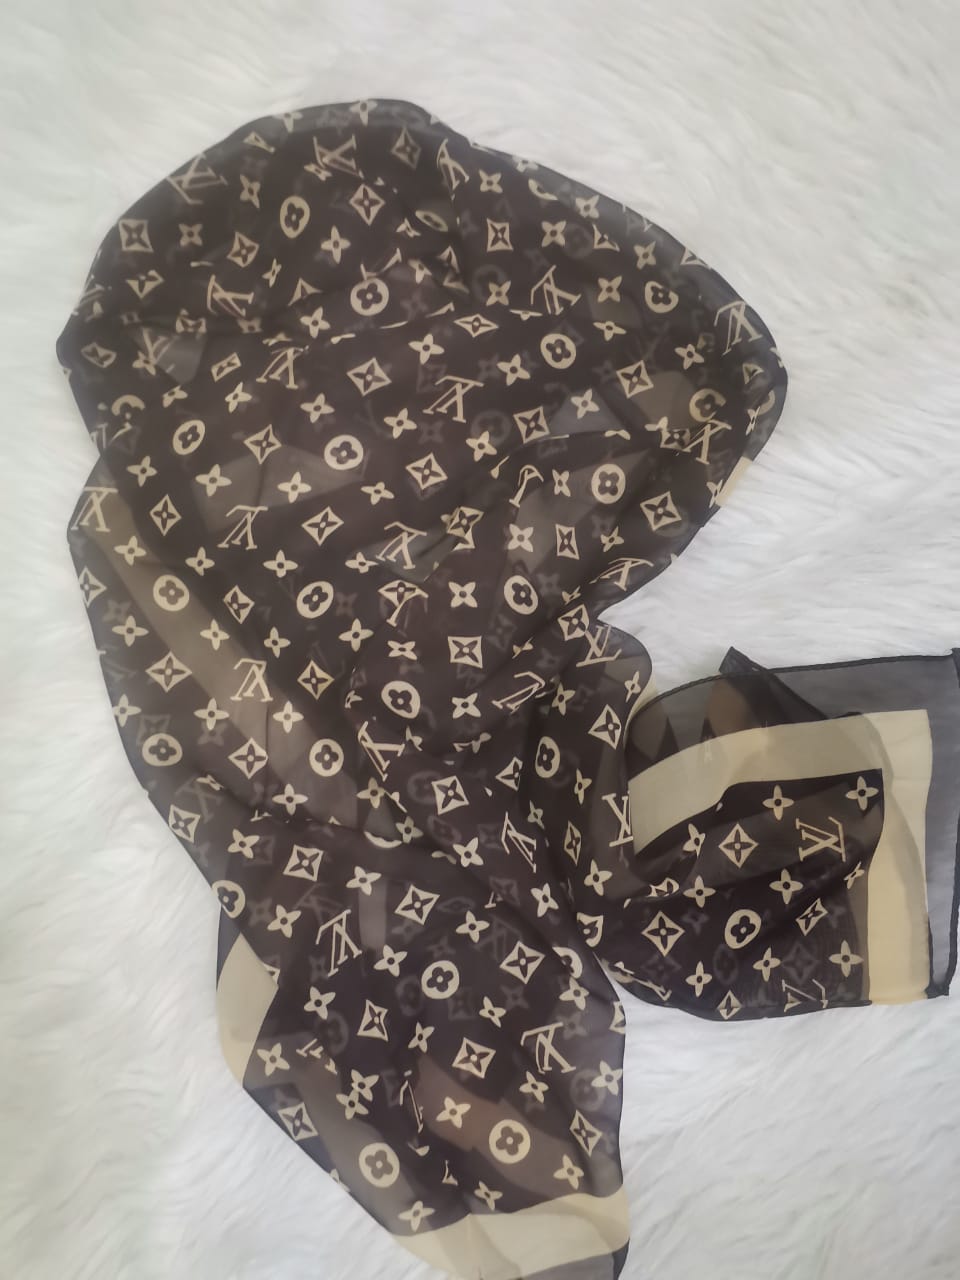 LV Bag - With Scarf